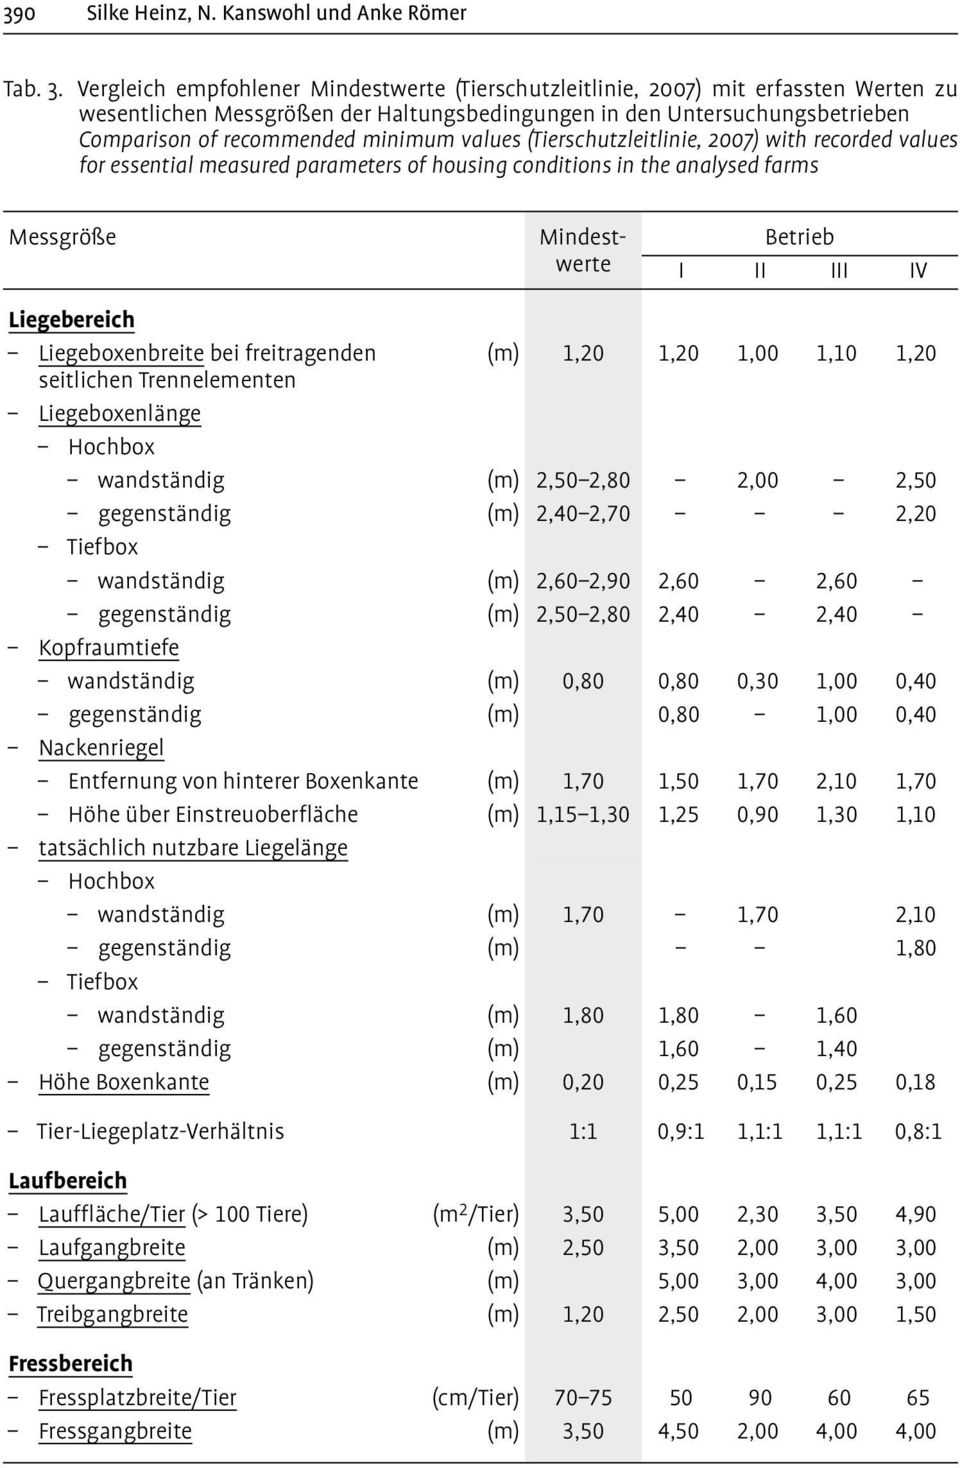 values (Tierschutzleitlinie, 2007) with recorded values for essential measured parameters of housing conditions in the analysed farms Messgröße Mindestwerte Betrieb I II III IV Liegebereich